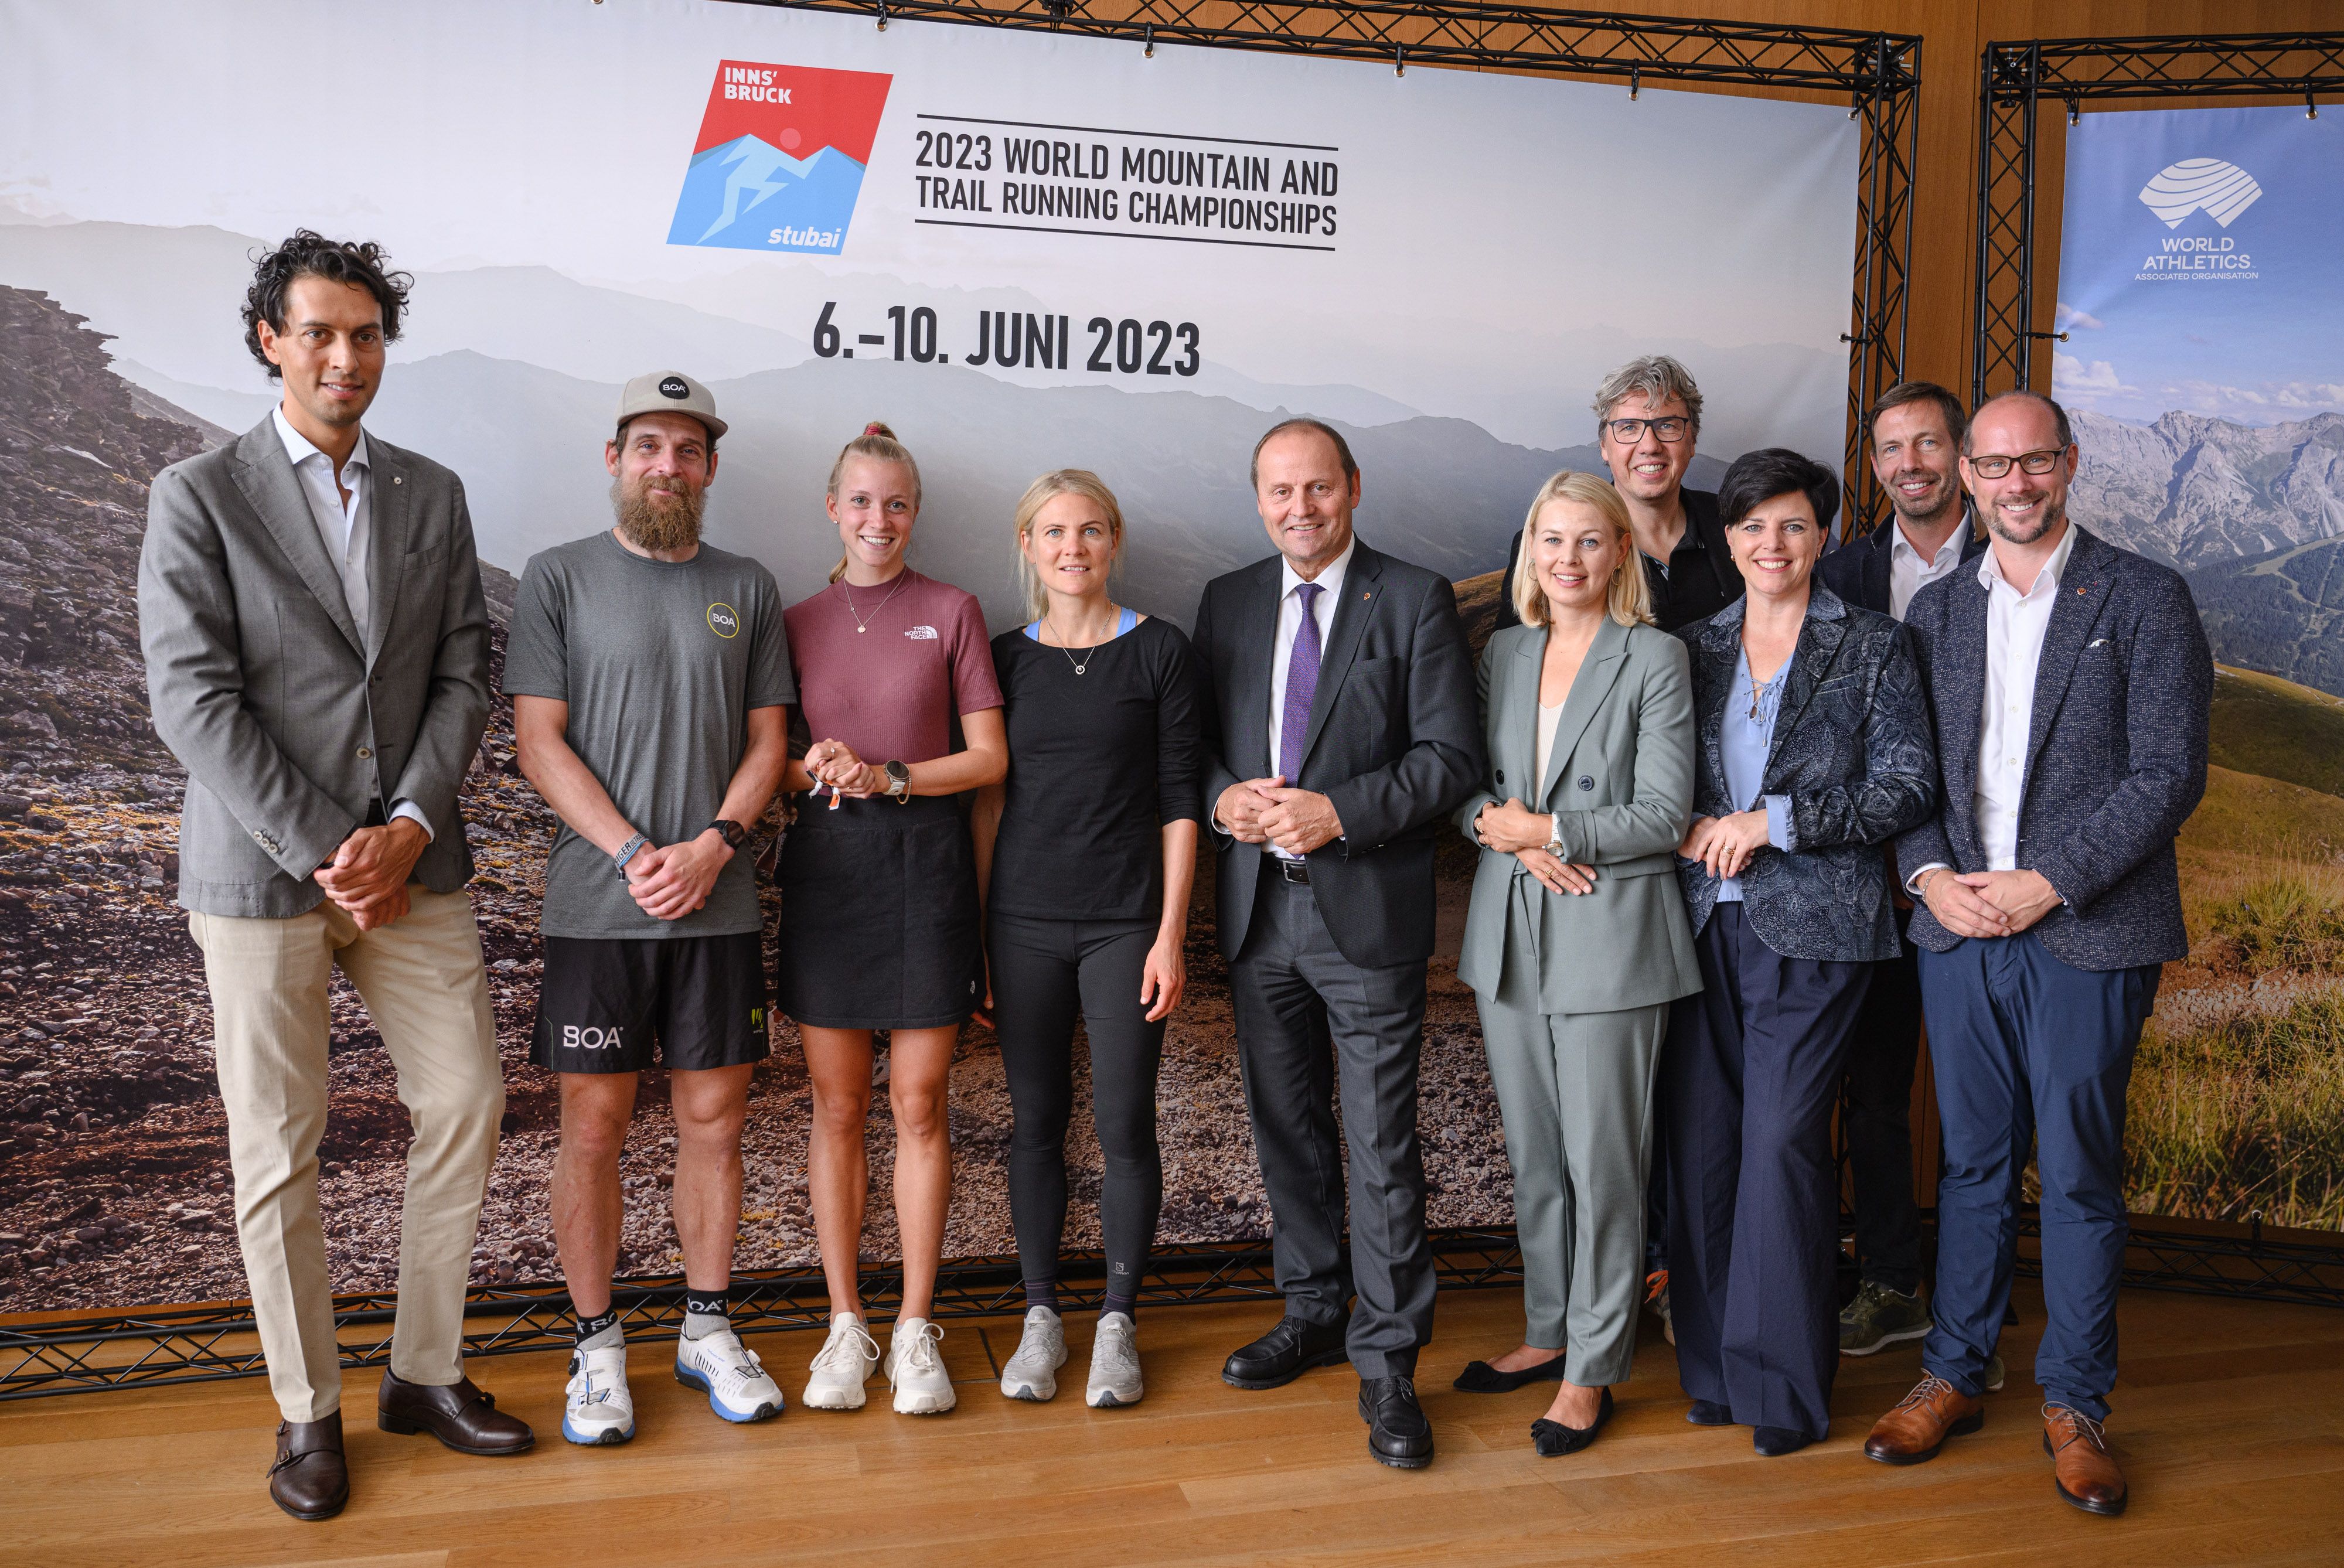 World Mountain and Trail Running Championships 2023 press conference